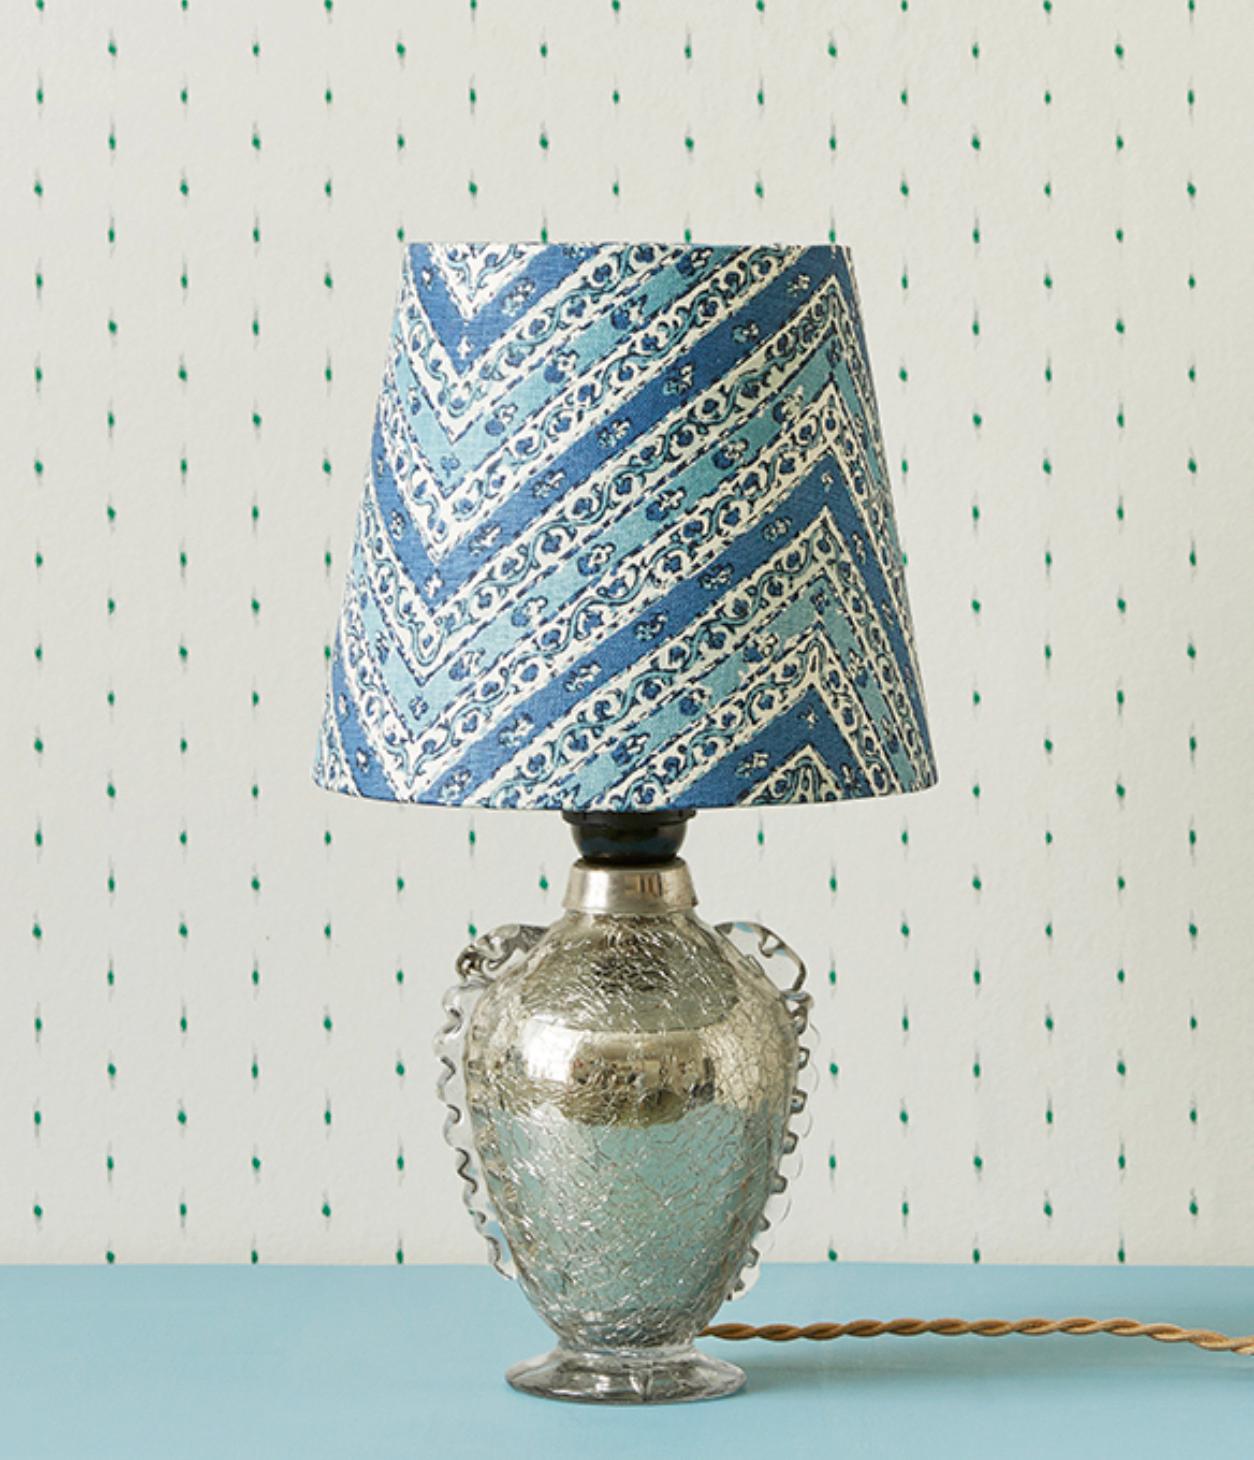 Sweden, Vintage

Mercury glass table lamp with customized shade by The Apartment.

H 36 x Ø 20 cm